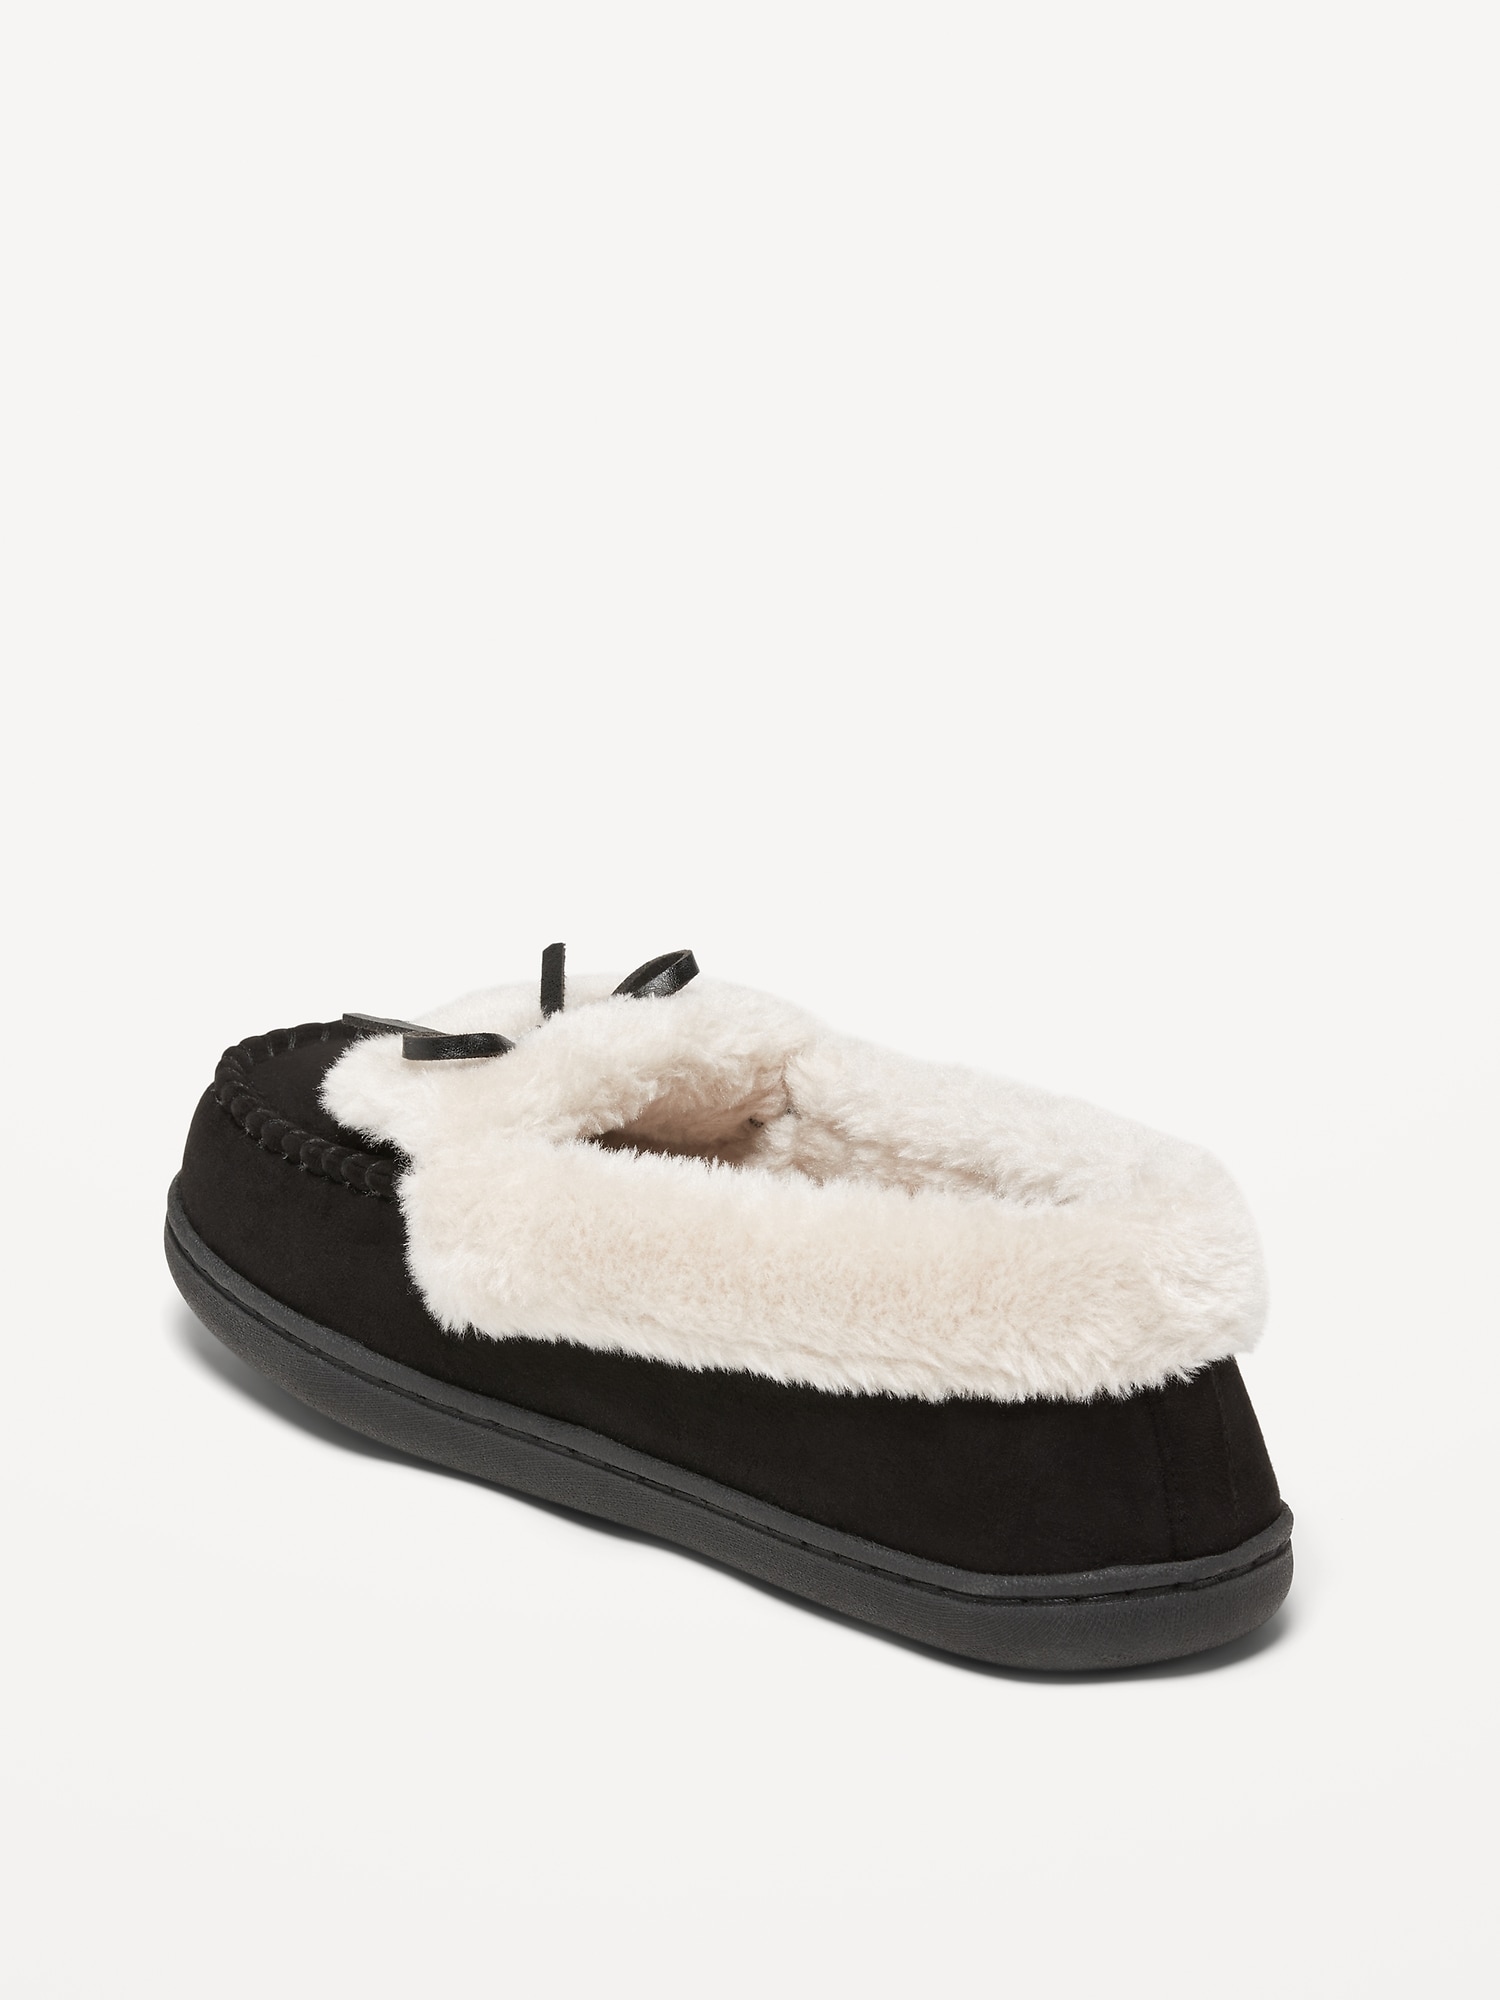 Old Navy Women's Faux-Leather Sherpa-Lined Clogs - - Size 10